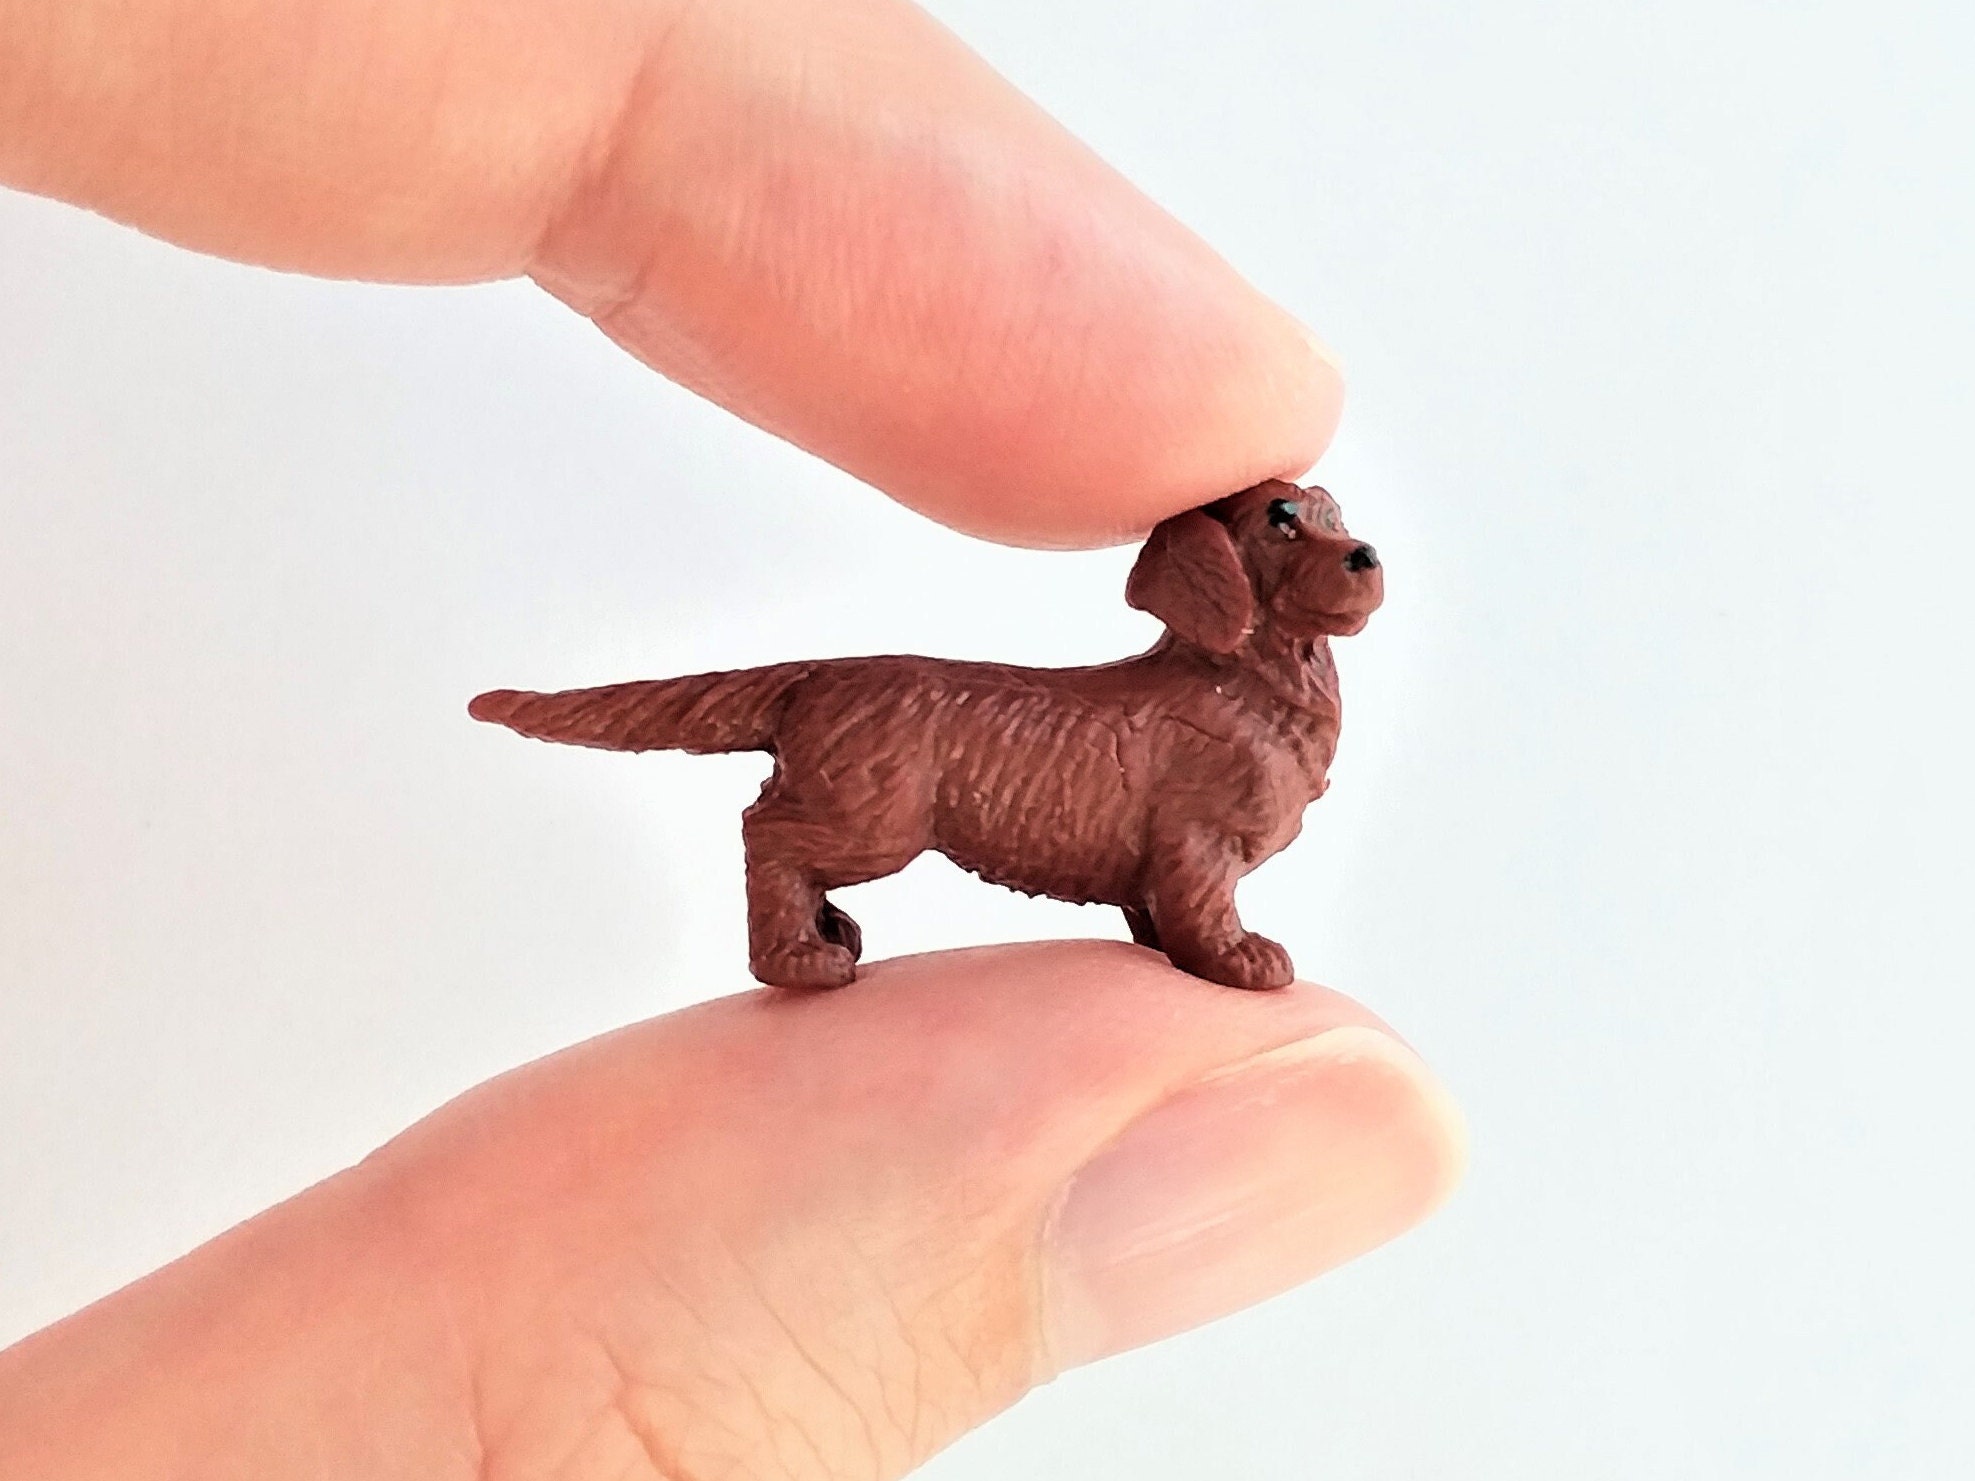 Finger Hands, Tiny Hands, Pet Stroking Gifts, Little Hands, Hand Toys,  Unique Cat Gifts, Gifts for Dog Lovers, Christmas Gift 